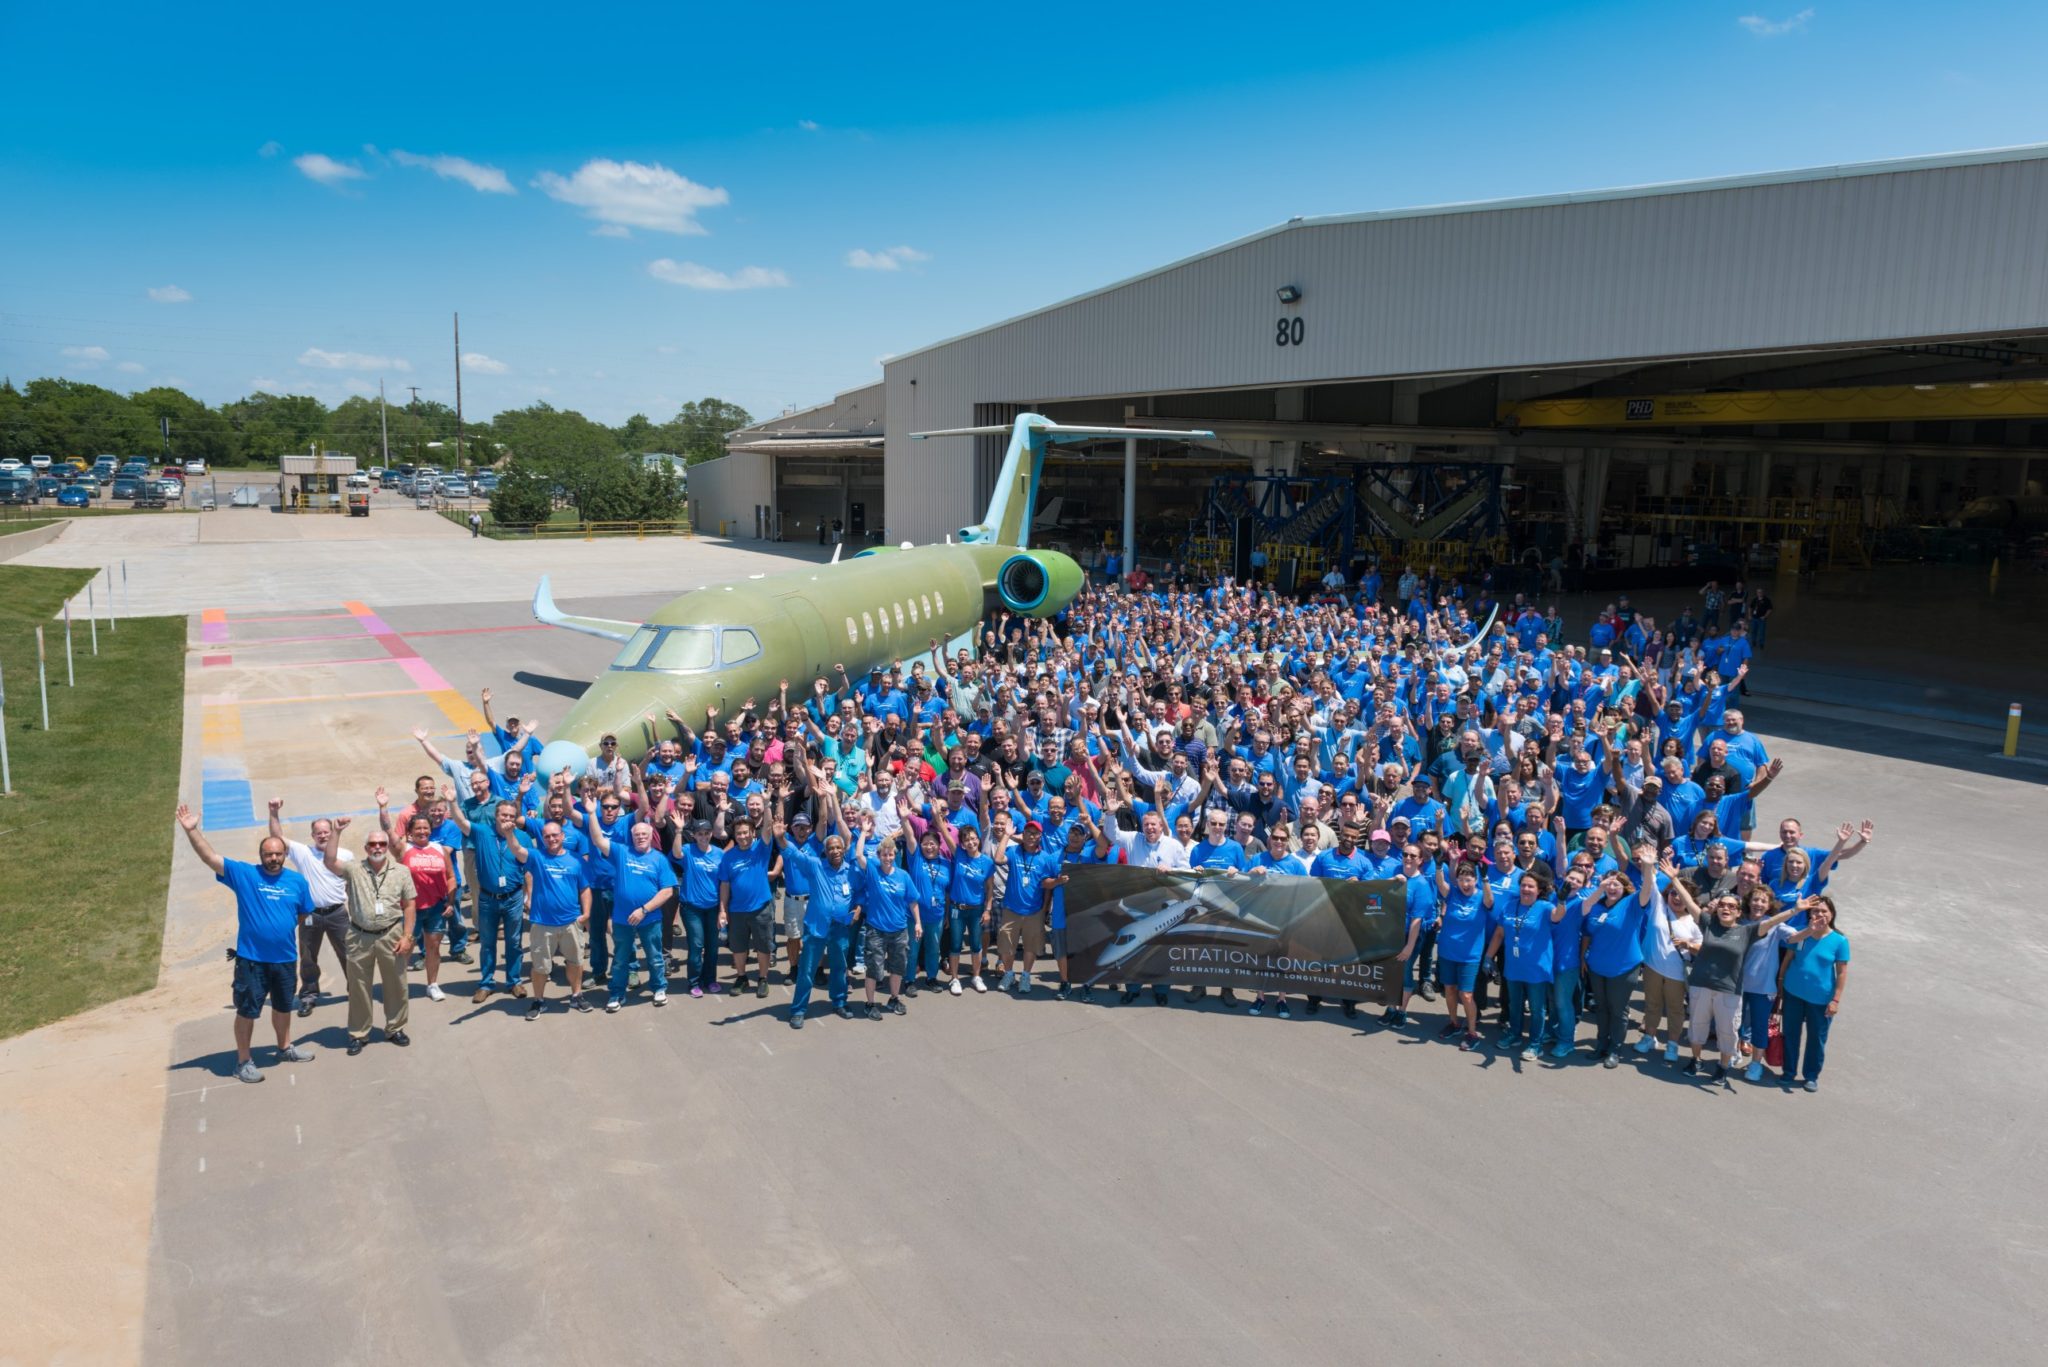 Textron Aviation rolls out first production Cessna Citation Longitude, introduces advanced manufacturing technologies to super-midsize market